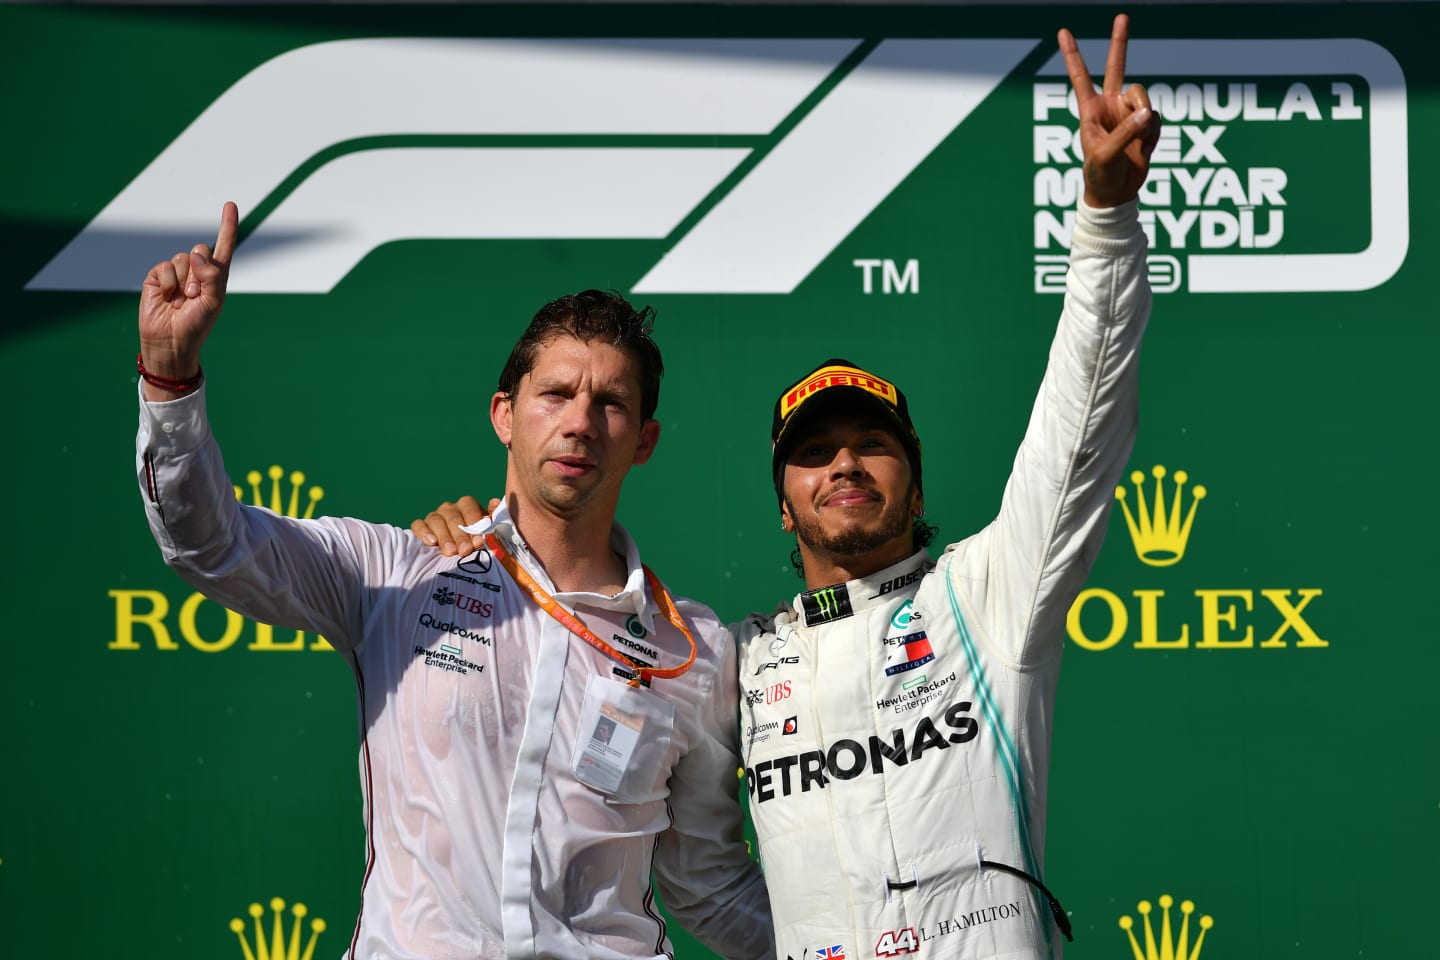 BUDAPEST, HUNGARY - AUGUST 04: Race winner Lewis Hamilton of Great Britain and Mercedes GP